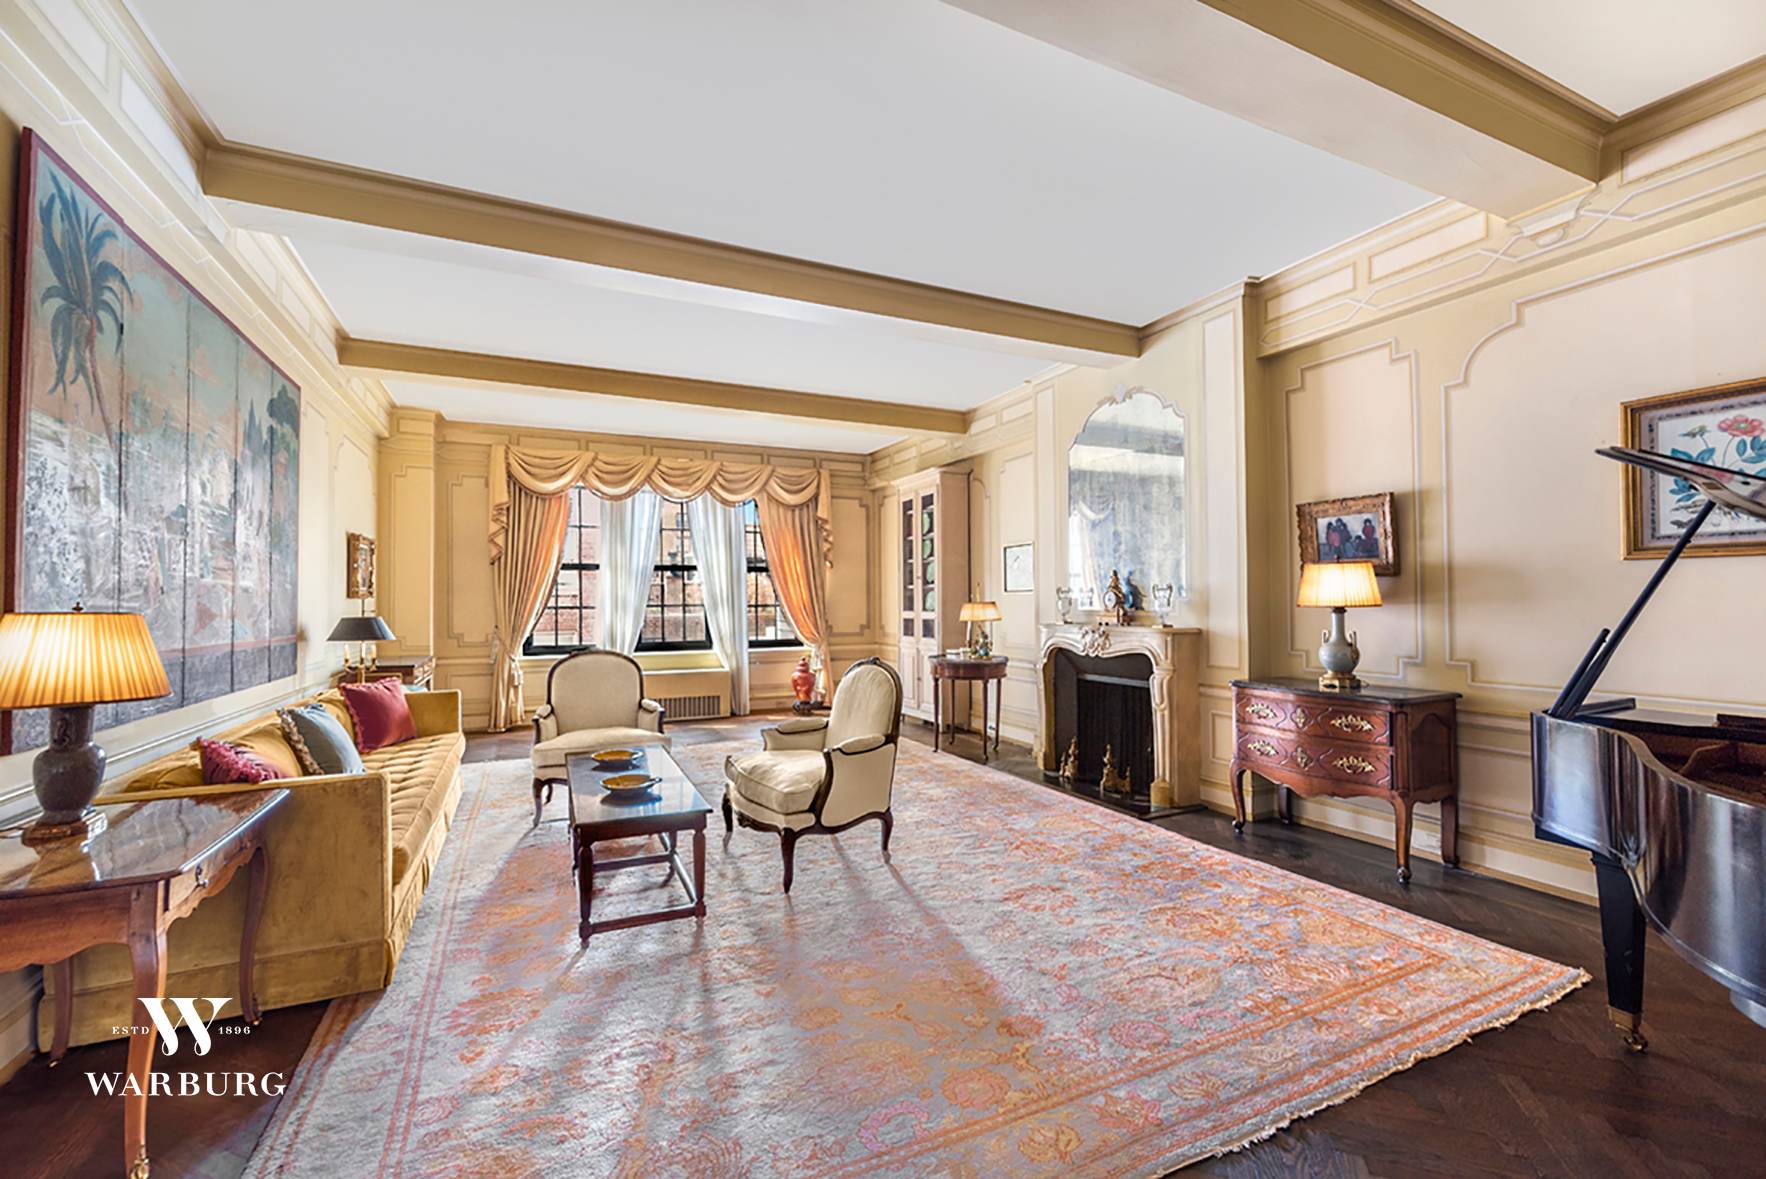 Grand and elegant, this 12 room residence is located in one of NYC's finest Park Avenue cooperative buildings at 78th Street.